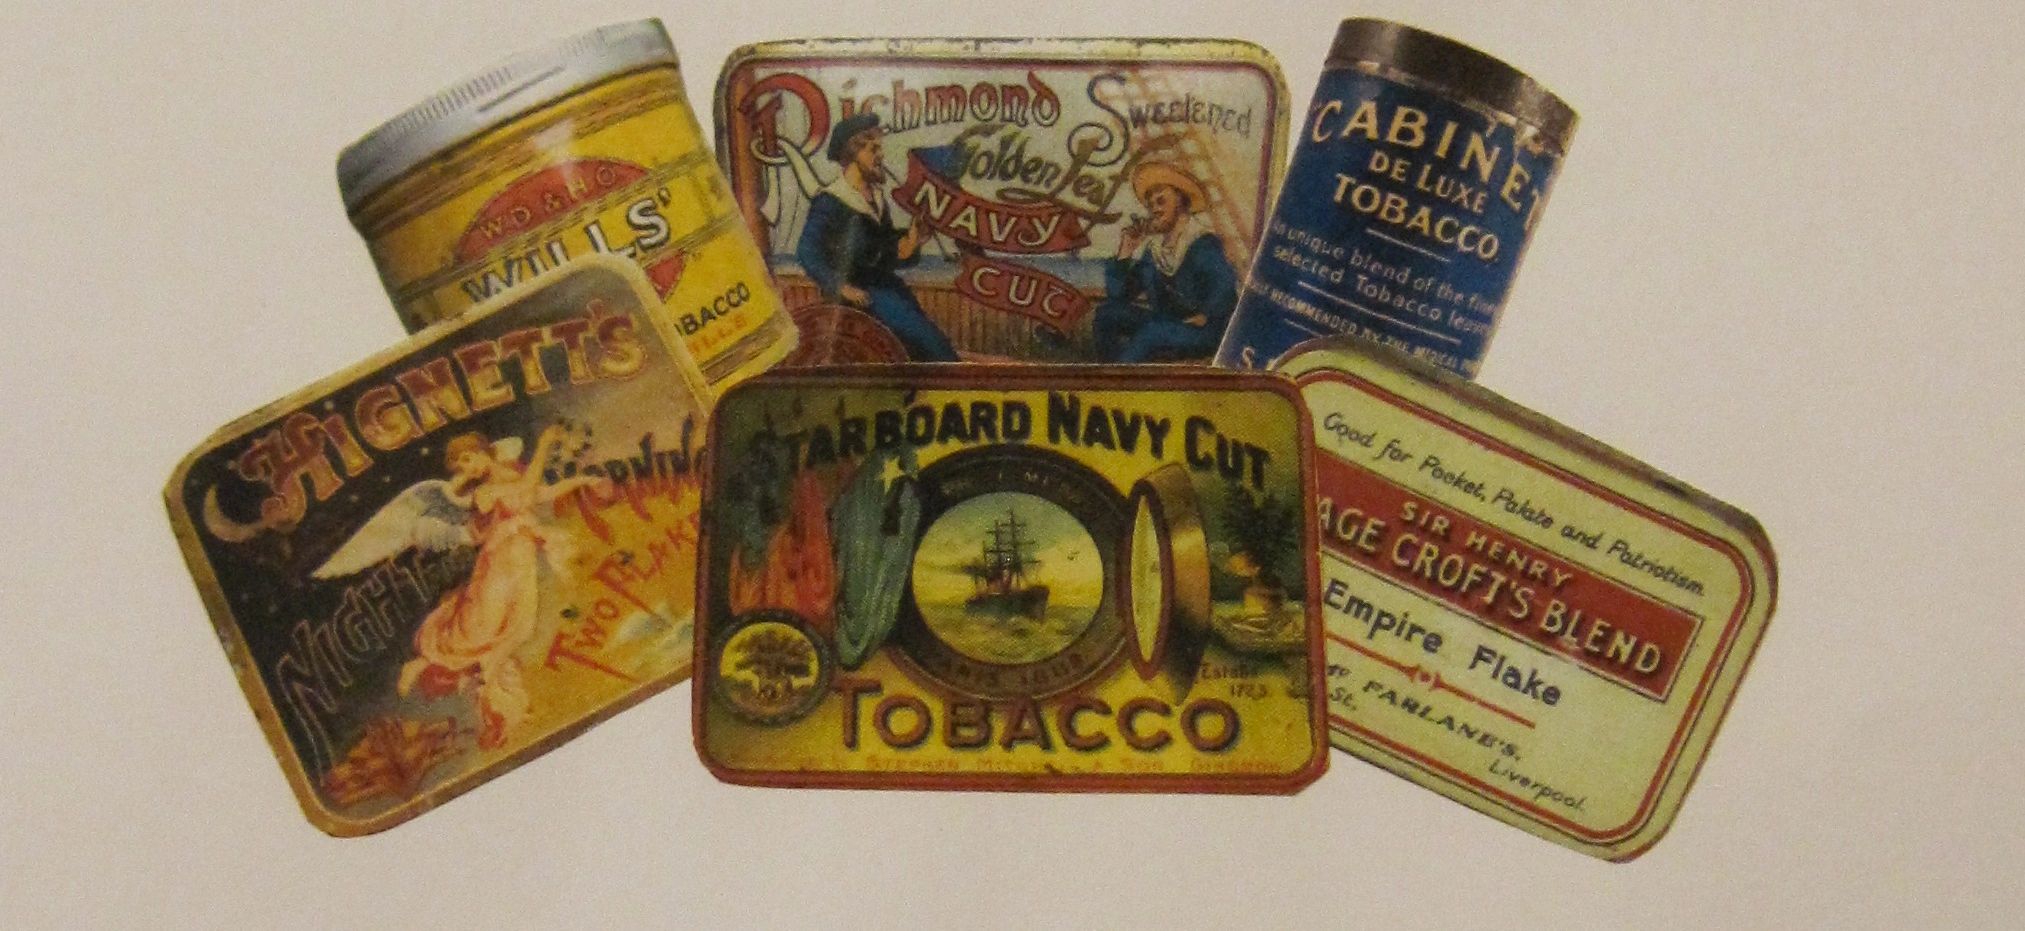 tobaccocollectibles.co.uk